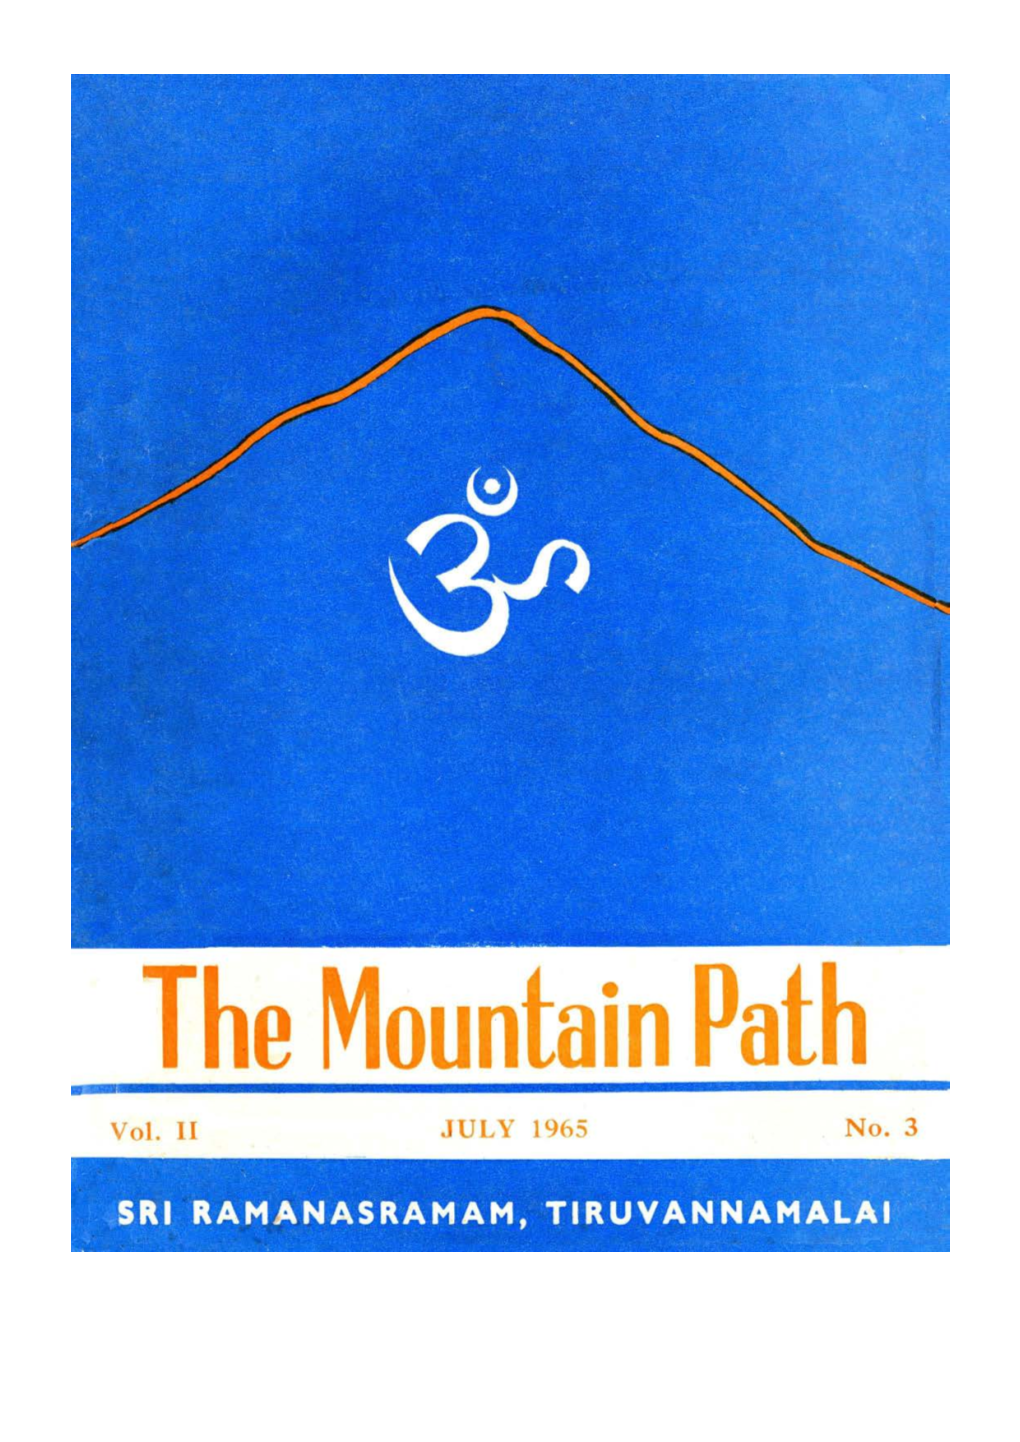 The Mountain Path, July 1965